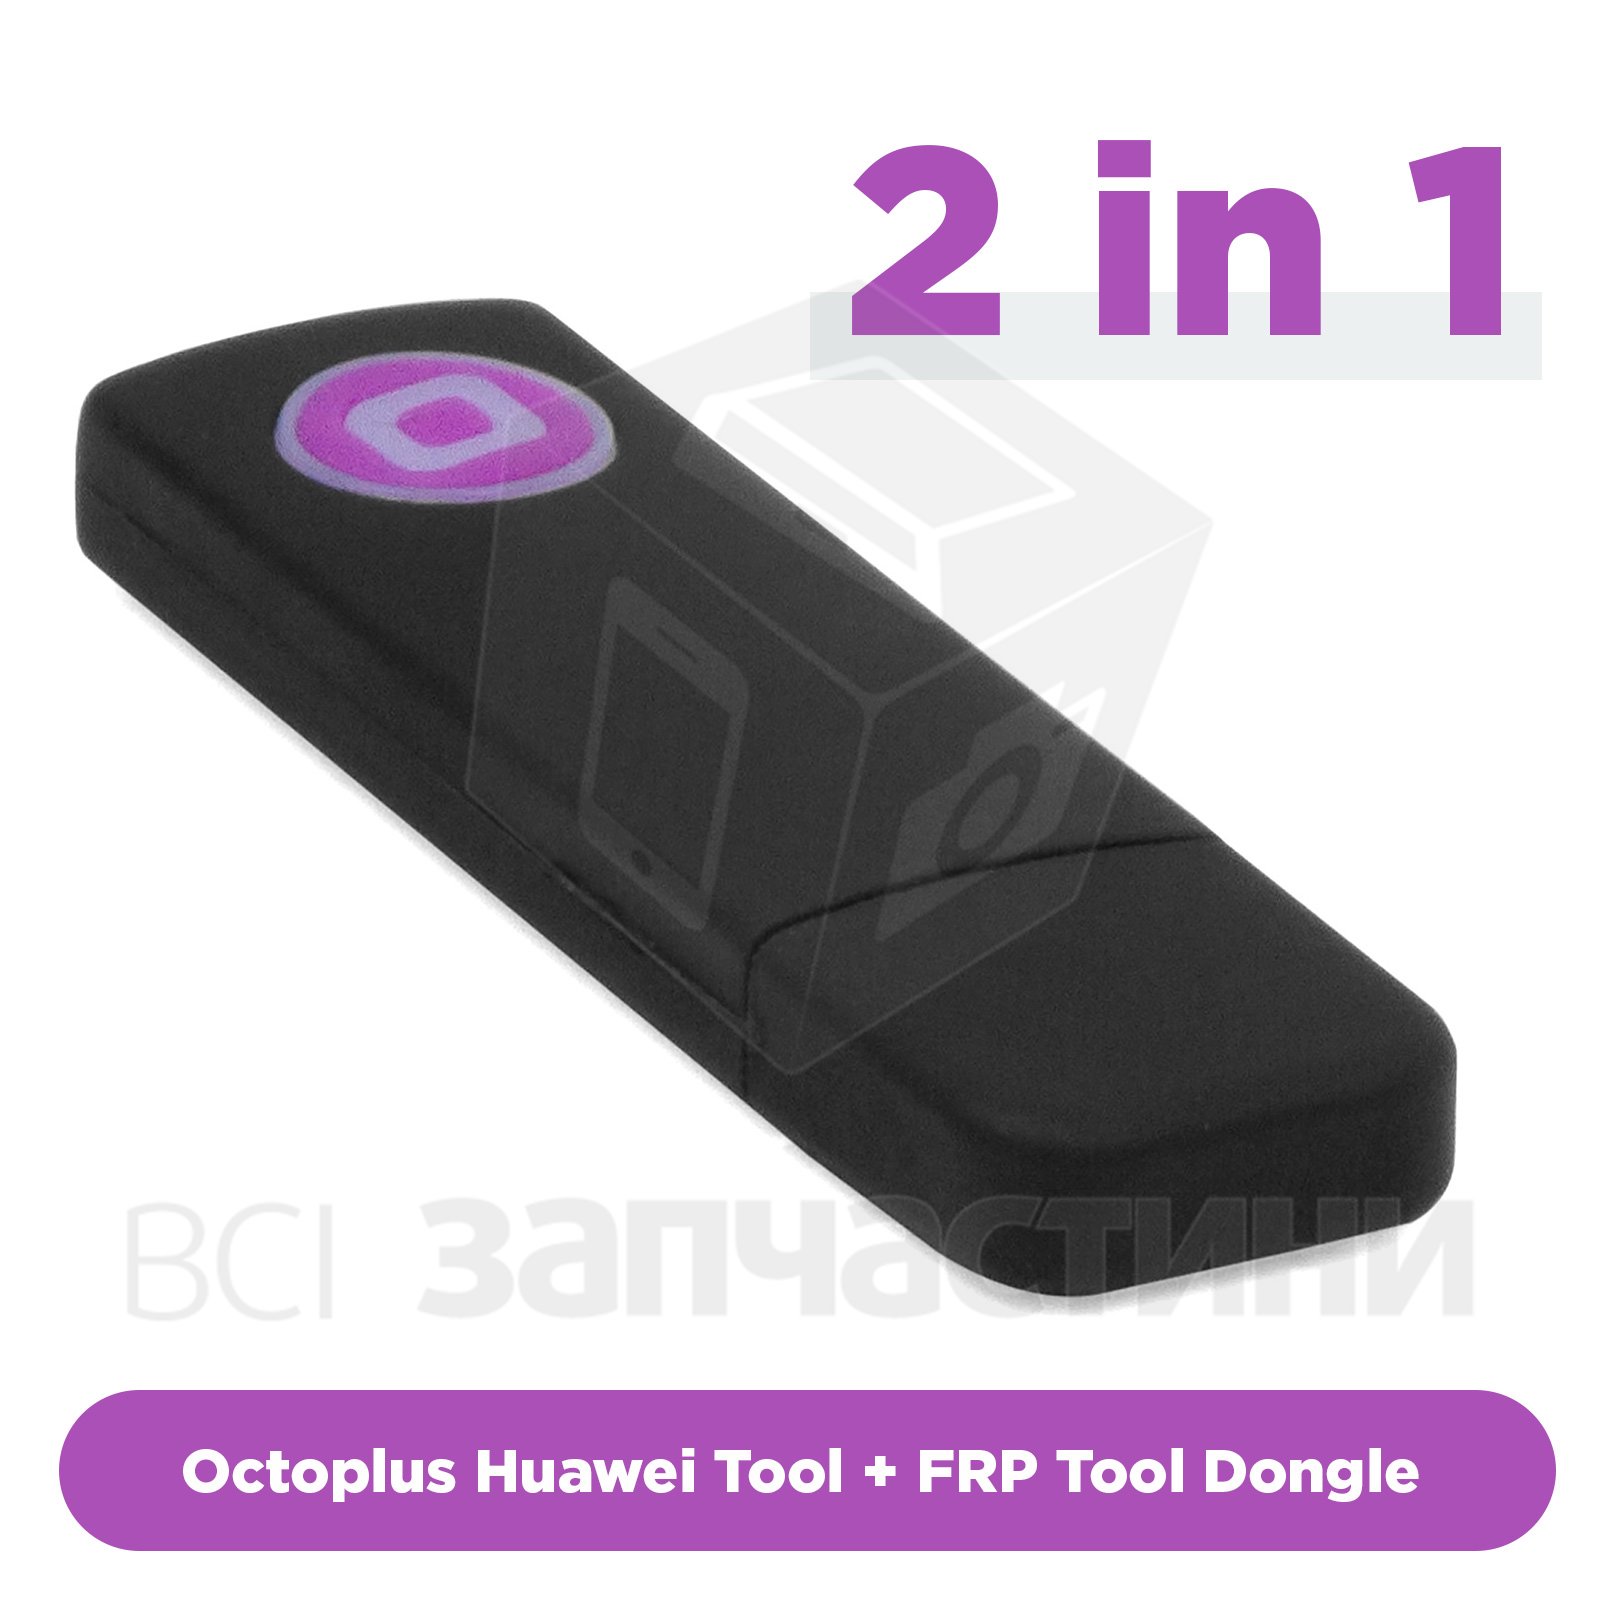 octoplus huawei tool crack without box